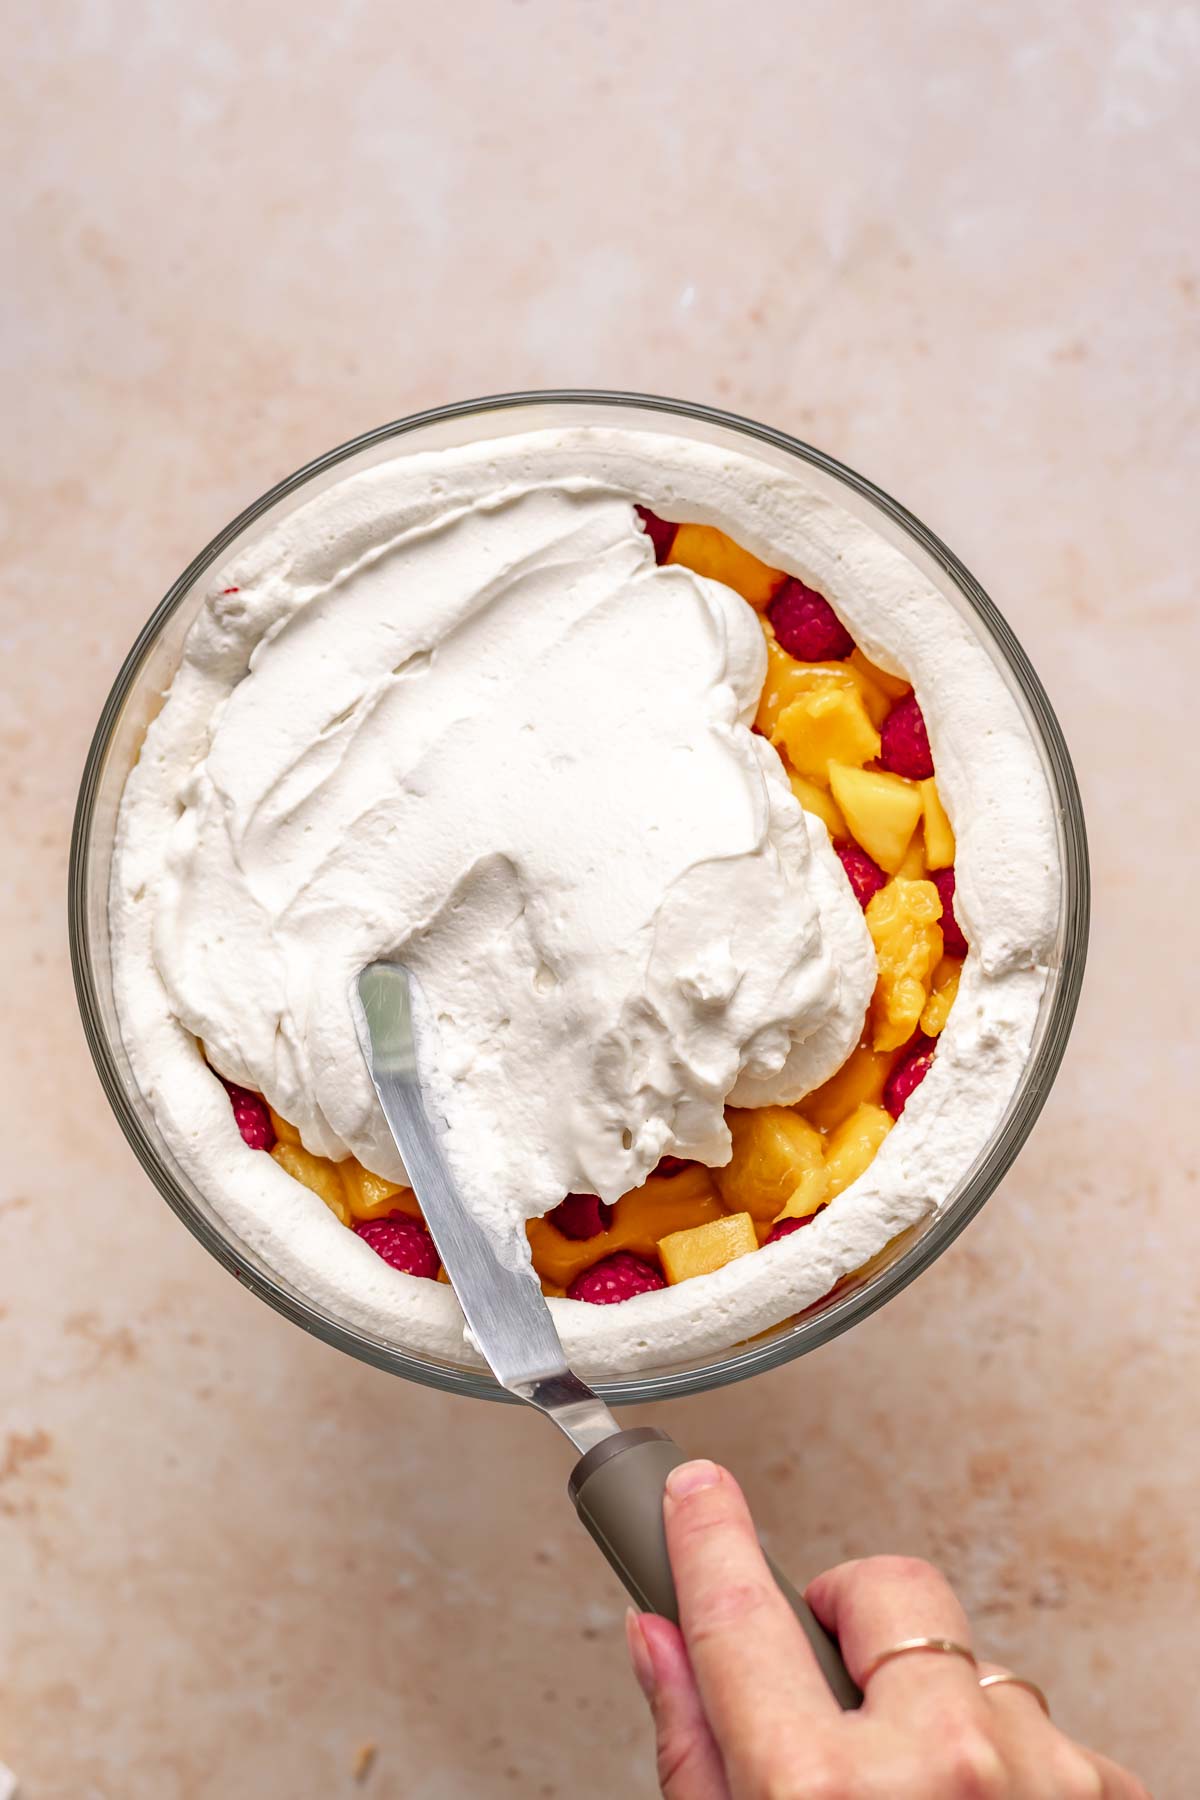 Coconut whipped cream being spread on top of fruit in the bowl for the final layer.